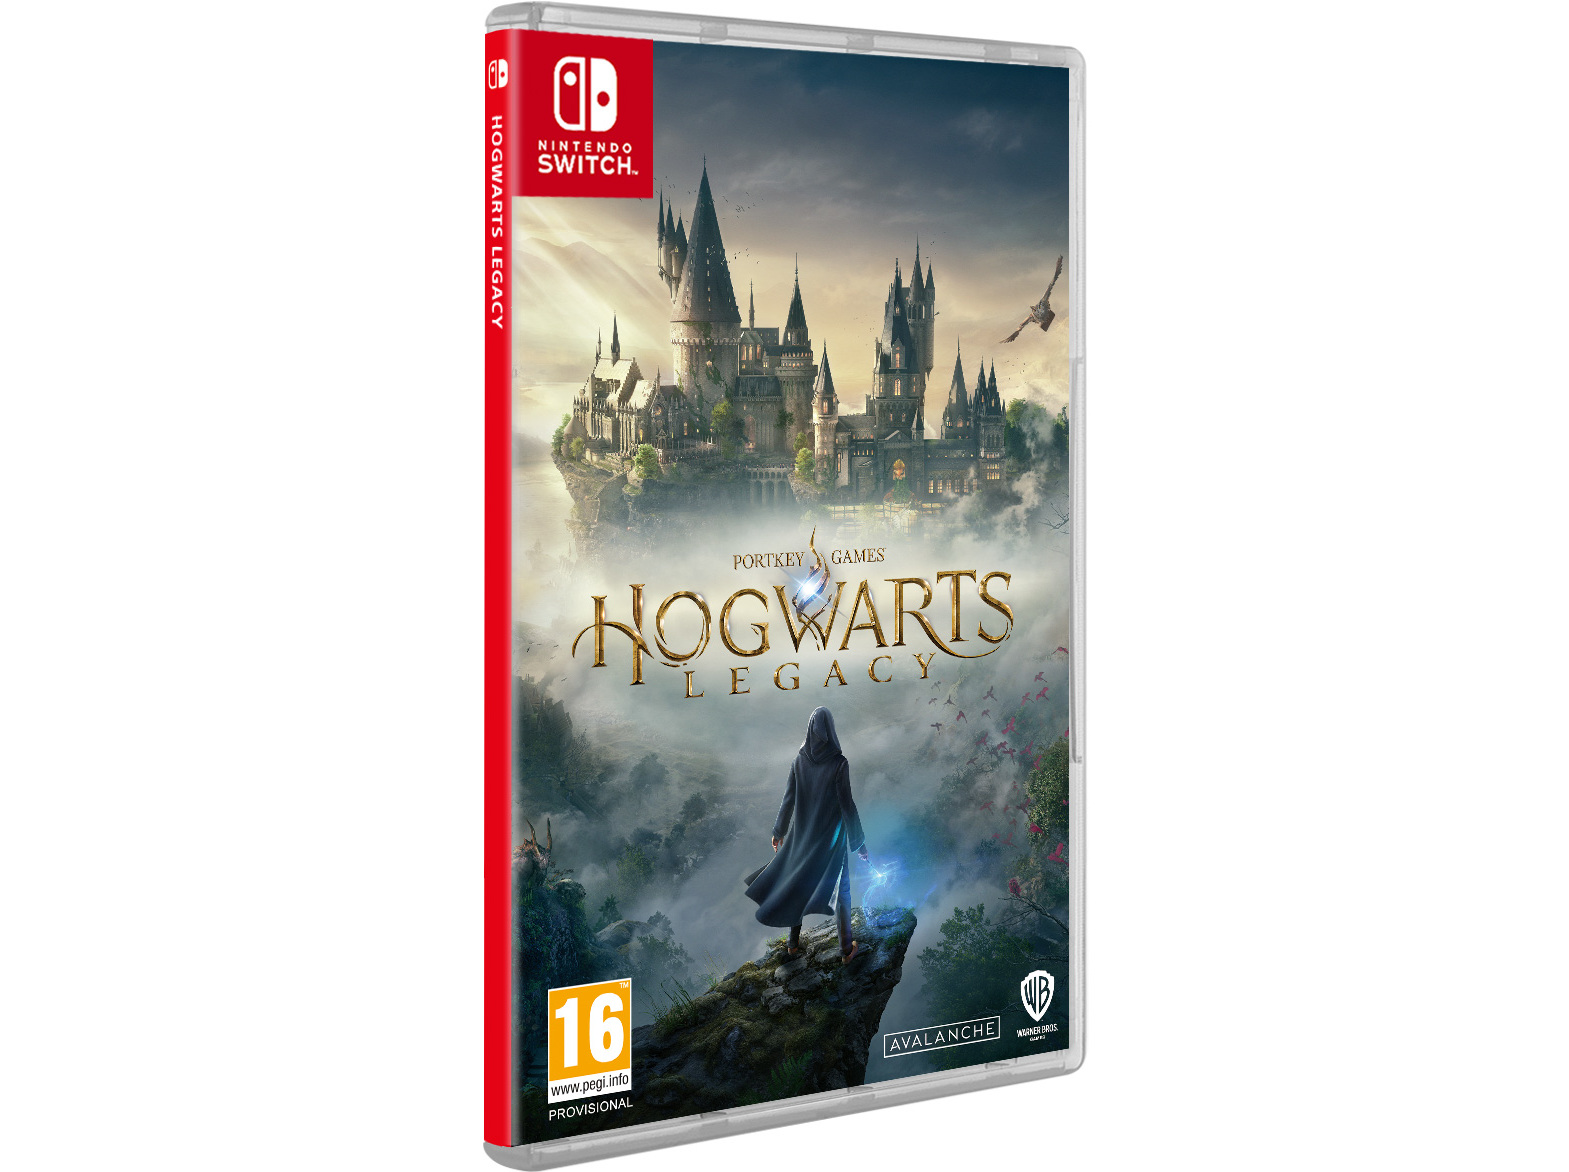 Hogwarts Legacy drops on to the Nintendo switch EShop in 3 days! Who is as  excited as I am? : r/HarryPotterGame